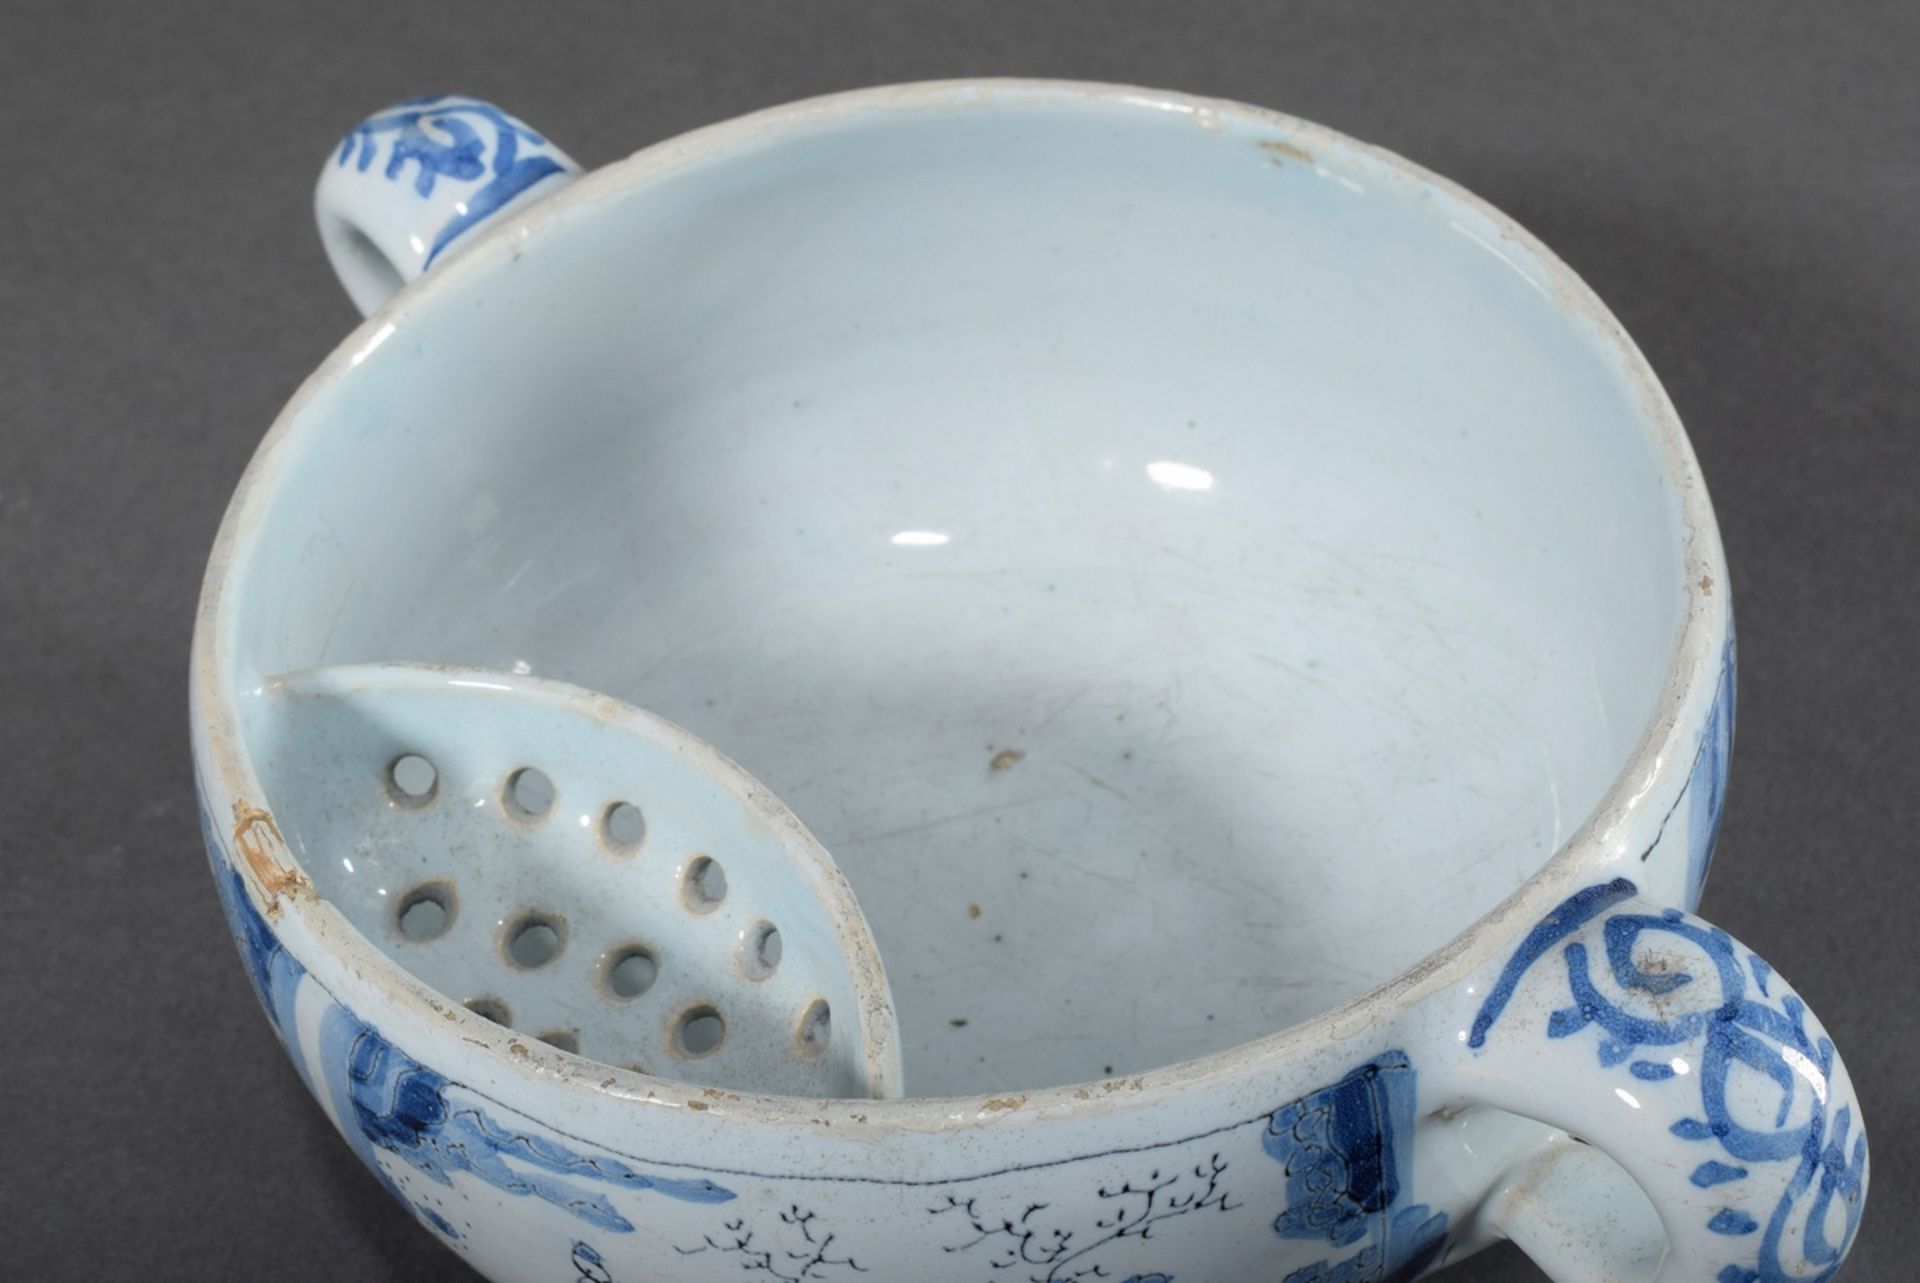 Faience shaving bowl with strainer insert for brush/soap and side handles, fine blue painting decor - Image 3 of 5